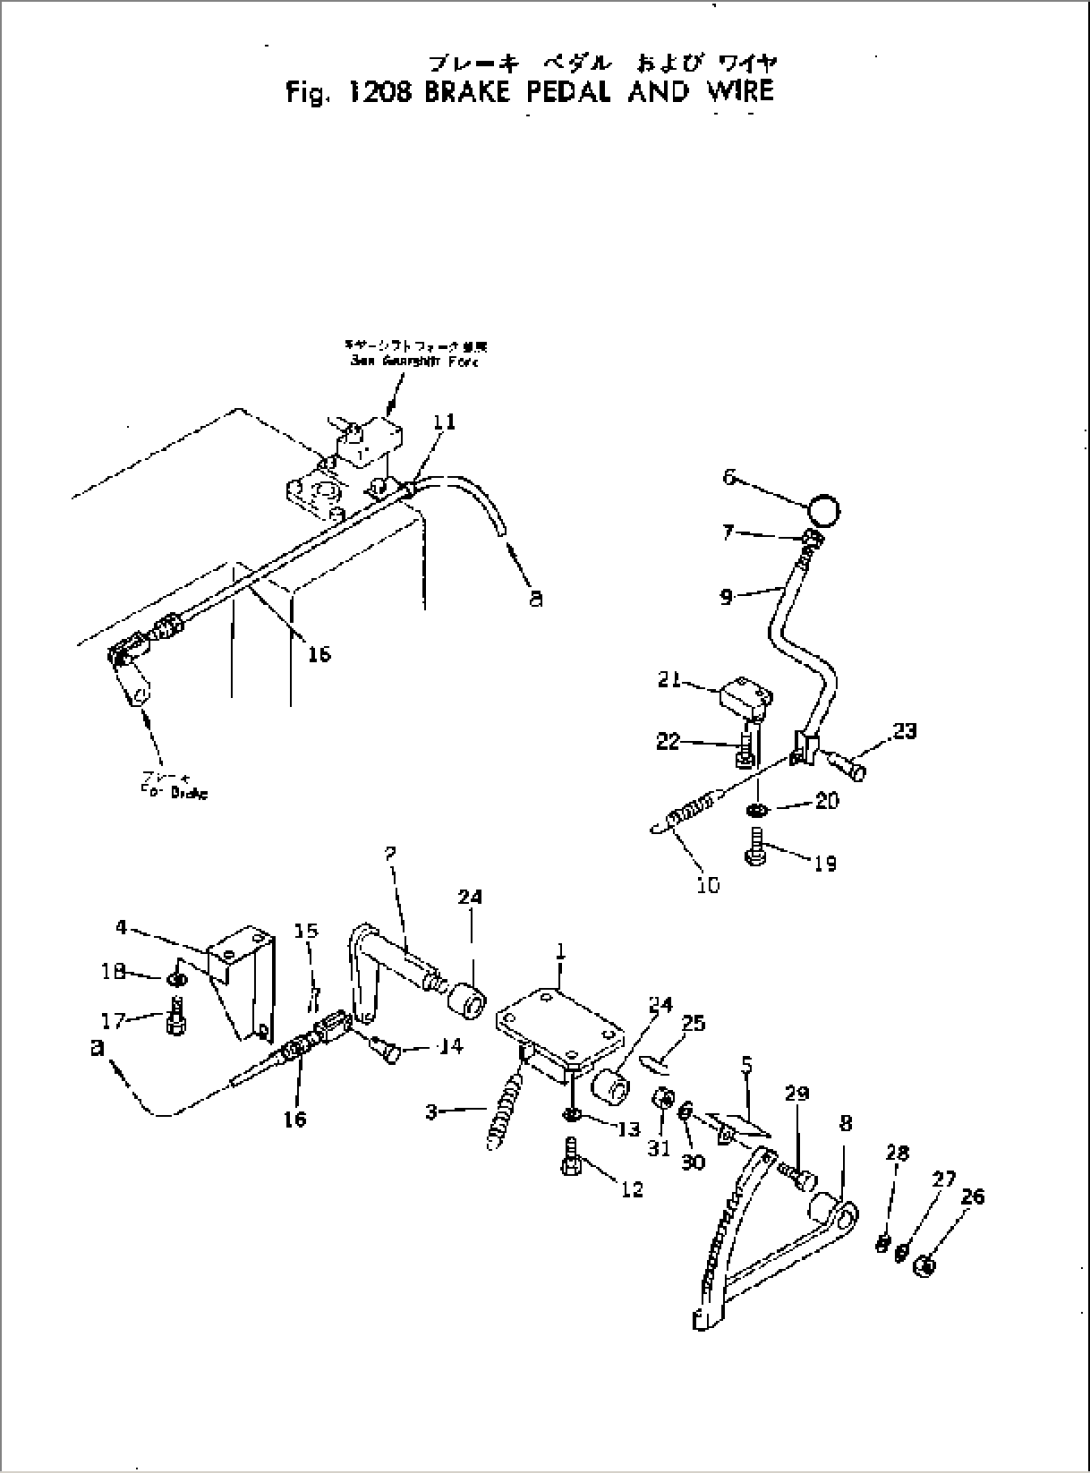 BRAKE PEDAL AND WIRE